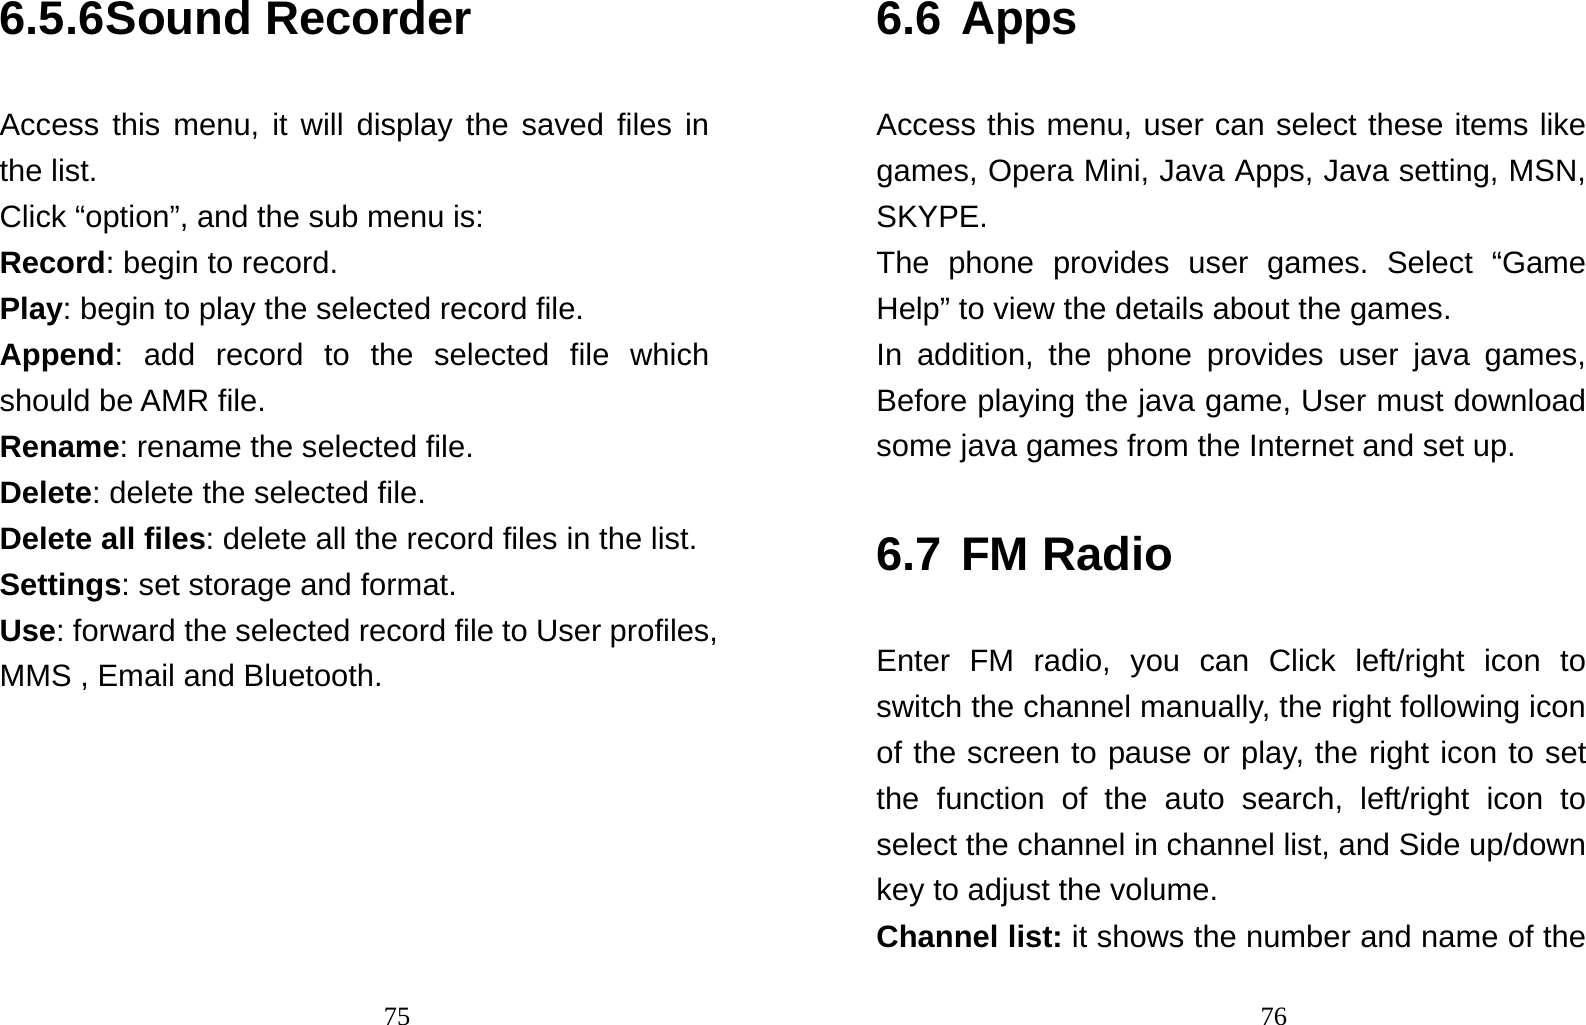                                756.5.6 Sound Recorder Access this menu, it will display the saved files in the list. Click “option”, and the sub menu is: Record: begin to record. Play: begin to play the selected record file. Append: add record to the selected file which should be AMR file. Rename: rename the selected file. Delete: delete the selected file.   Delete all files: delete all the record files in the list. Settings: set storage and format. Use: forward the selected record file to User profiles, MMS , Email and Bluetooth.                                   766.6 Apps Access this menu, user can select these items like games, Opera Mini, Java Apps, Java setting, MSN, SKYPE. The phone provides user games. Select “Game Help” to view the details about the games. In addition, the phone provides user java games, Before playing the java game, User must download some java games from the Internet and set up.   6.7 FM Radio Enter FM radio, you can Click left/right icon to switch the channel manually, the right following icon of the screen to pause or play, the right icon to set the function of the auto search, left/right icon to select the channel in channel list, and Side up/down key to adjust the volume.   Channel list: it shows the number and name of the 